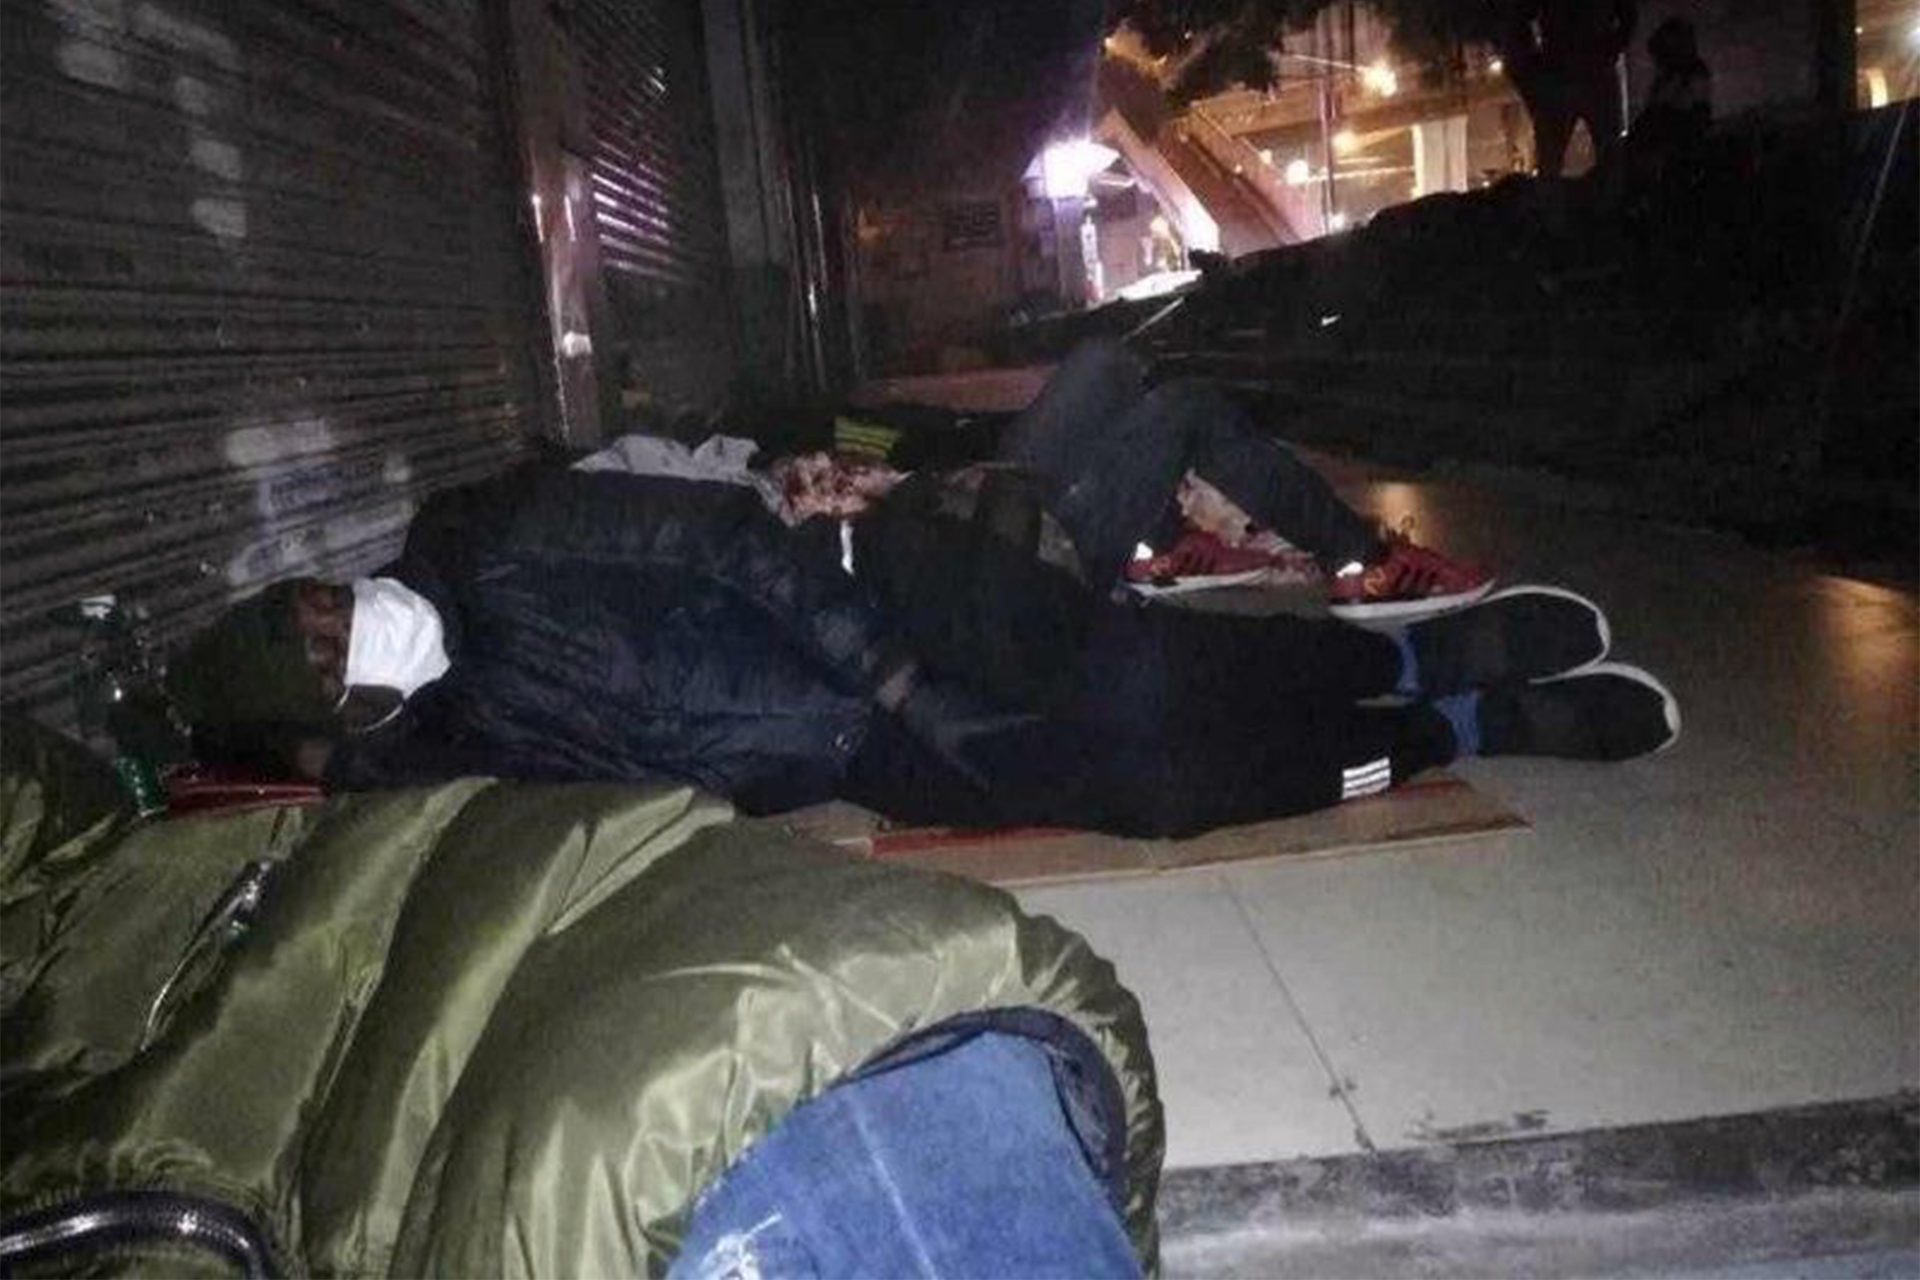 Africans sleeping on the street in Guangzhou, China, after being unable to find shelter.